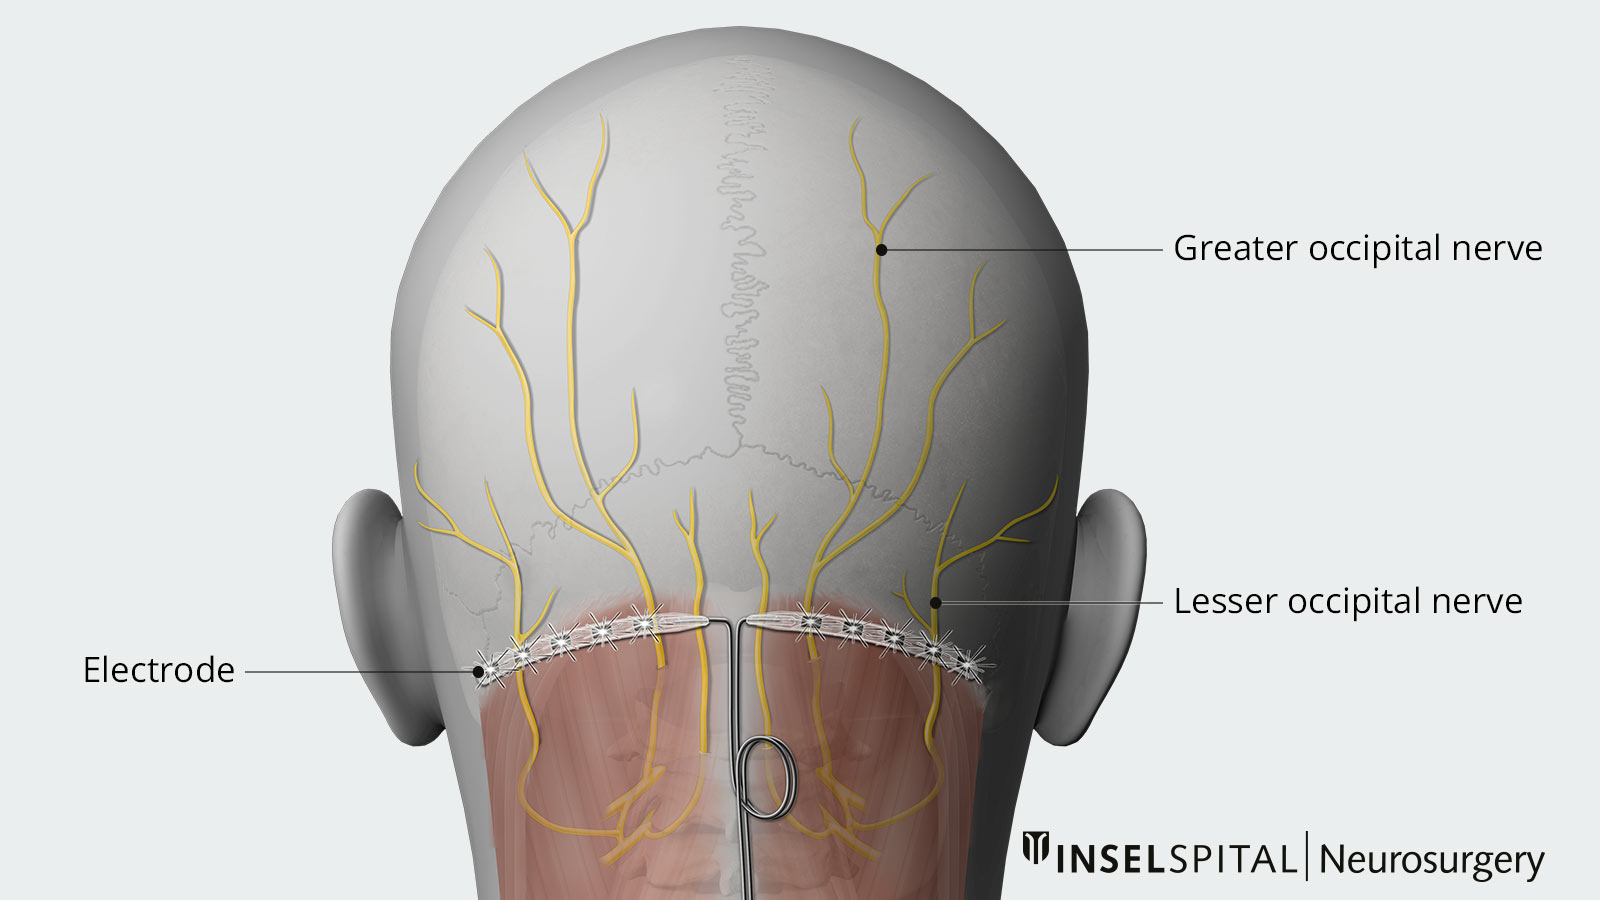 Drawing of the positioning of the electrodes for occipital nerve stimulation